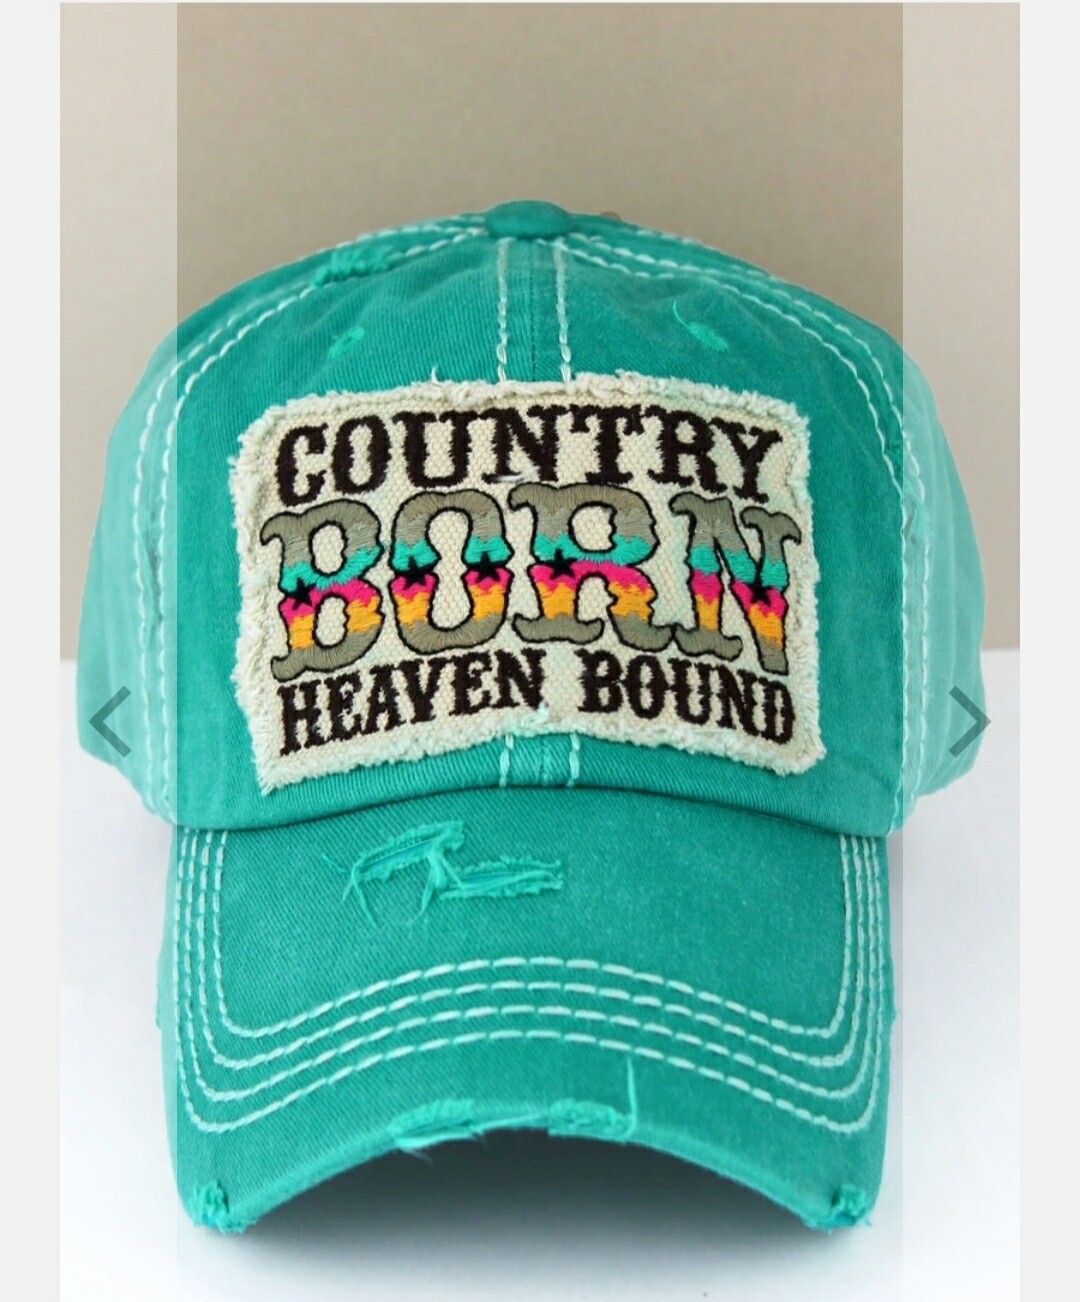 Distressed Turquoise Country Born Heaven Bound Cap